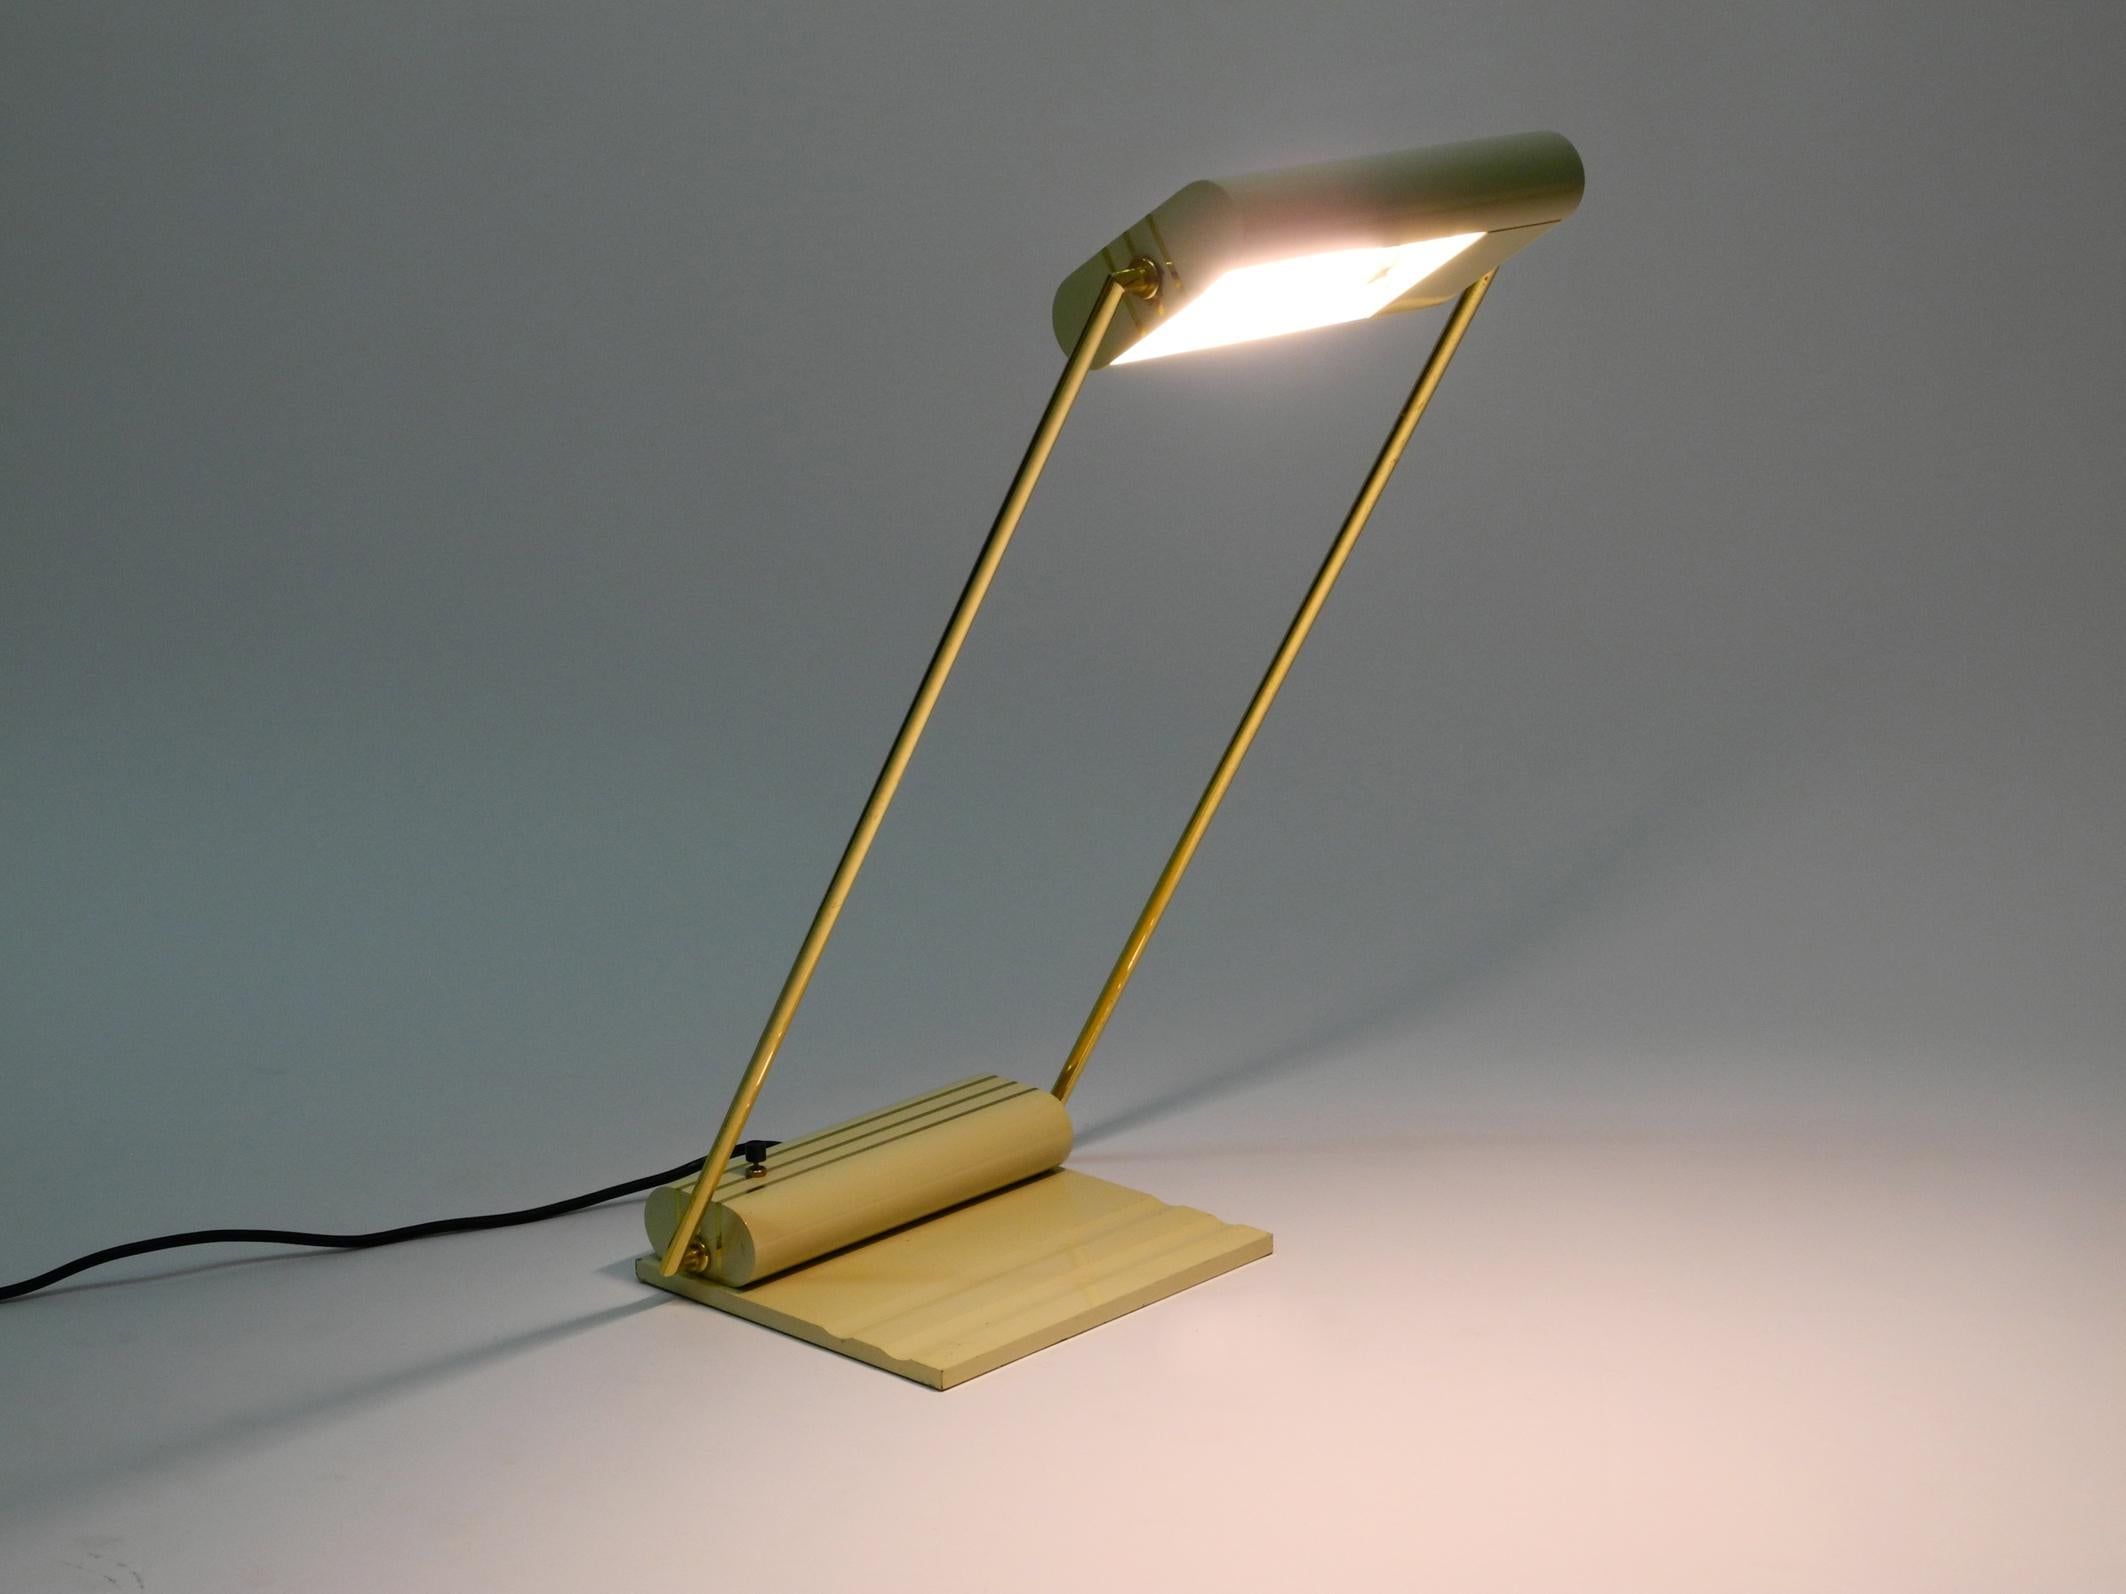 Very elegant 1980s large metal table lamp from Italy.
Great minimalistic postmodern design.
Heavy metal foot, shade also made of metal.
Both rods holding the shade are made of brass.
Shade and brass holders are steplessly movable.
Very well